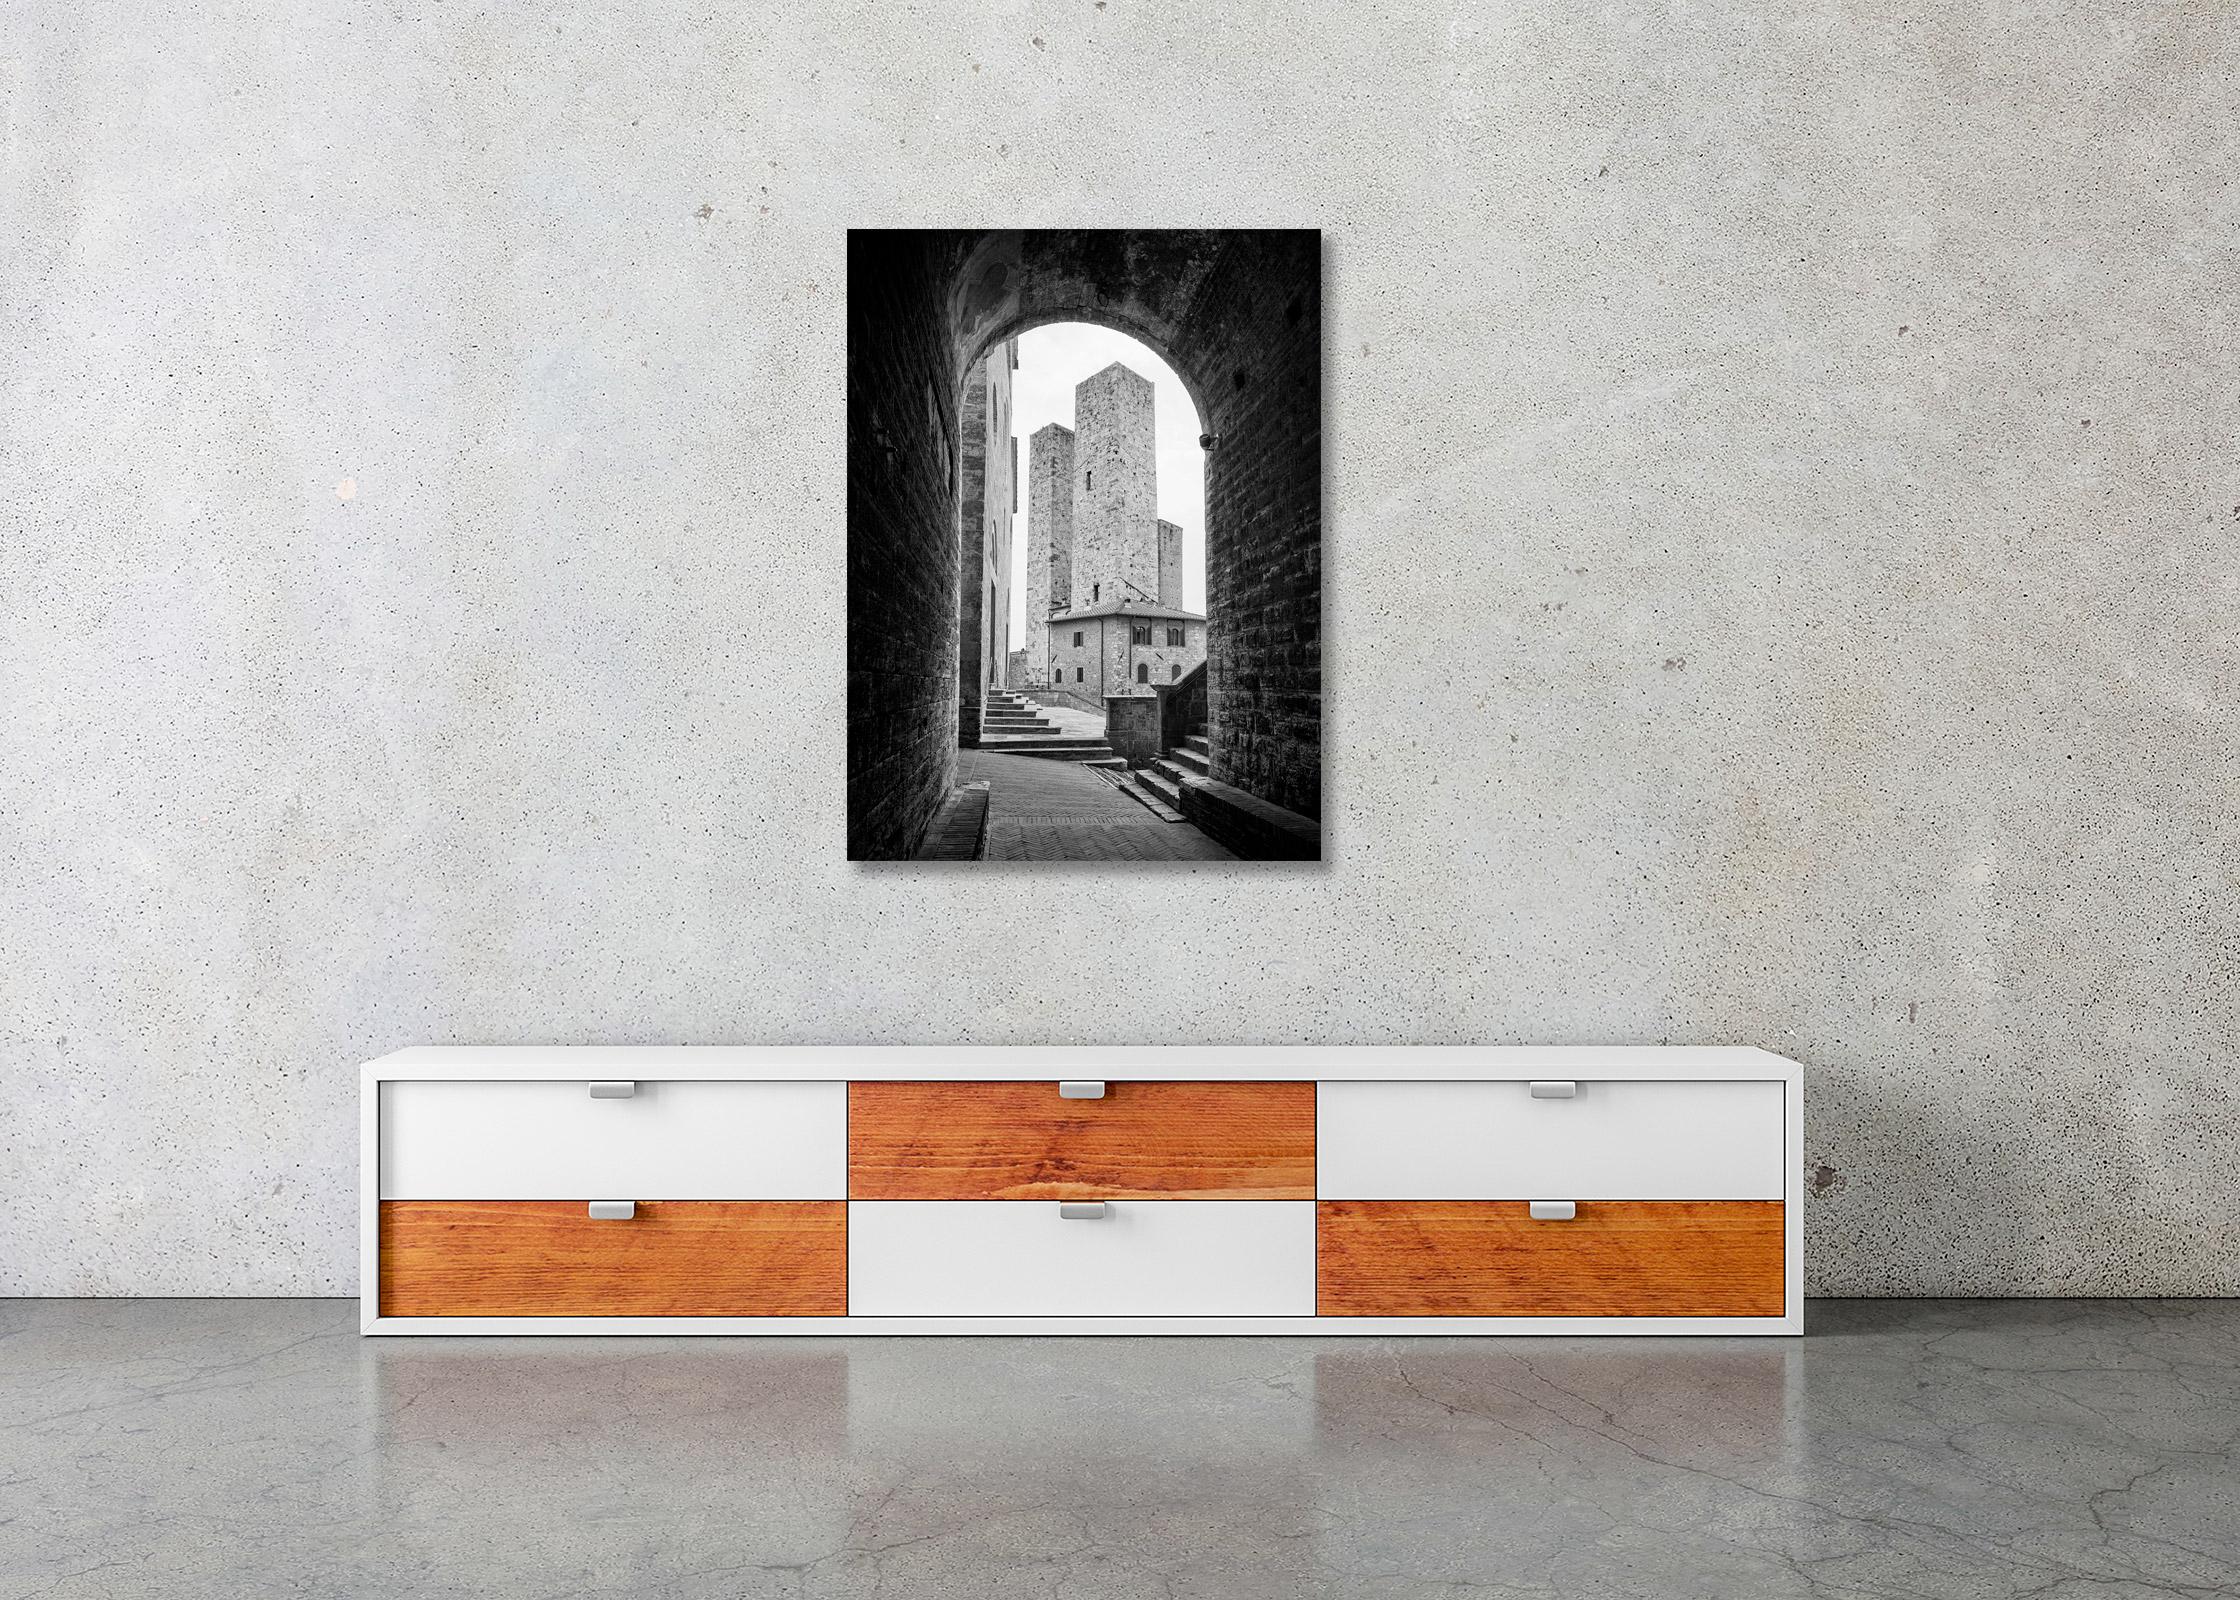 Black and white fine art cityscape - landscape photography. The towers of san Gimignano, Tuscany, Italy. Archival pigment ink print, edition of 8. Signed, titled, dated and numbered by artist. Certificate of authenticity included. Printed with 4cm